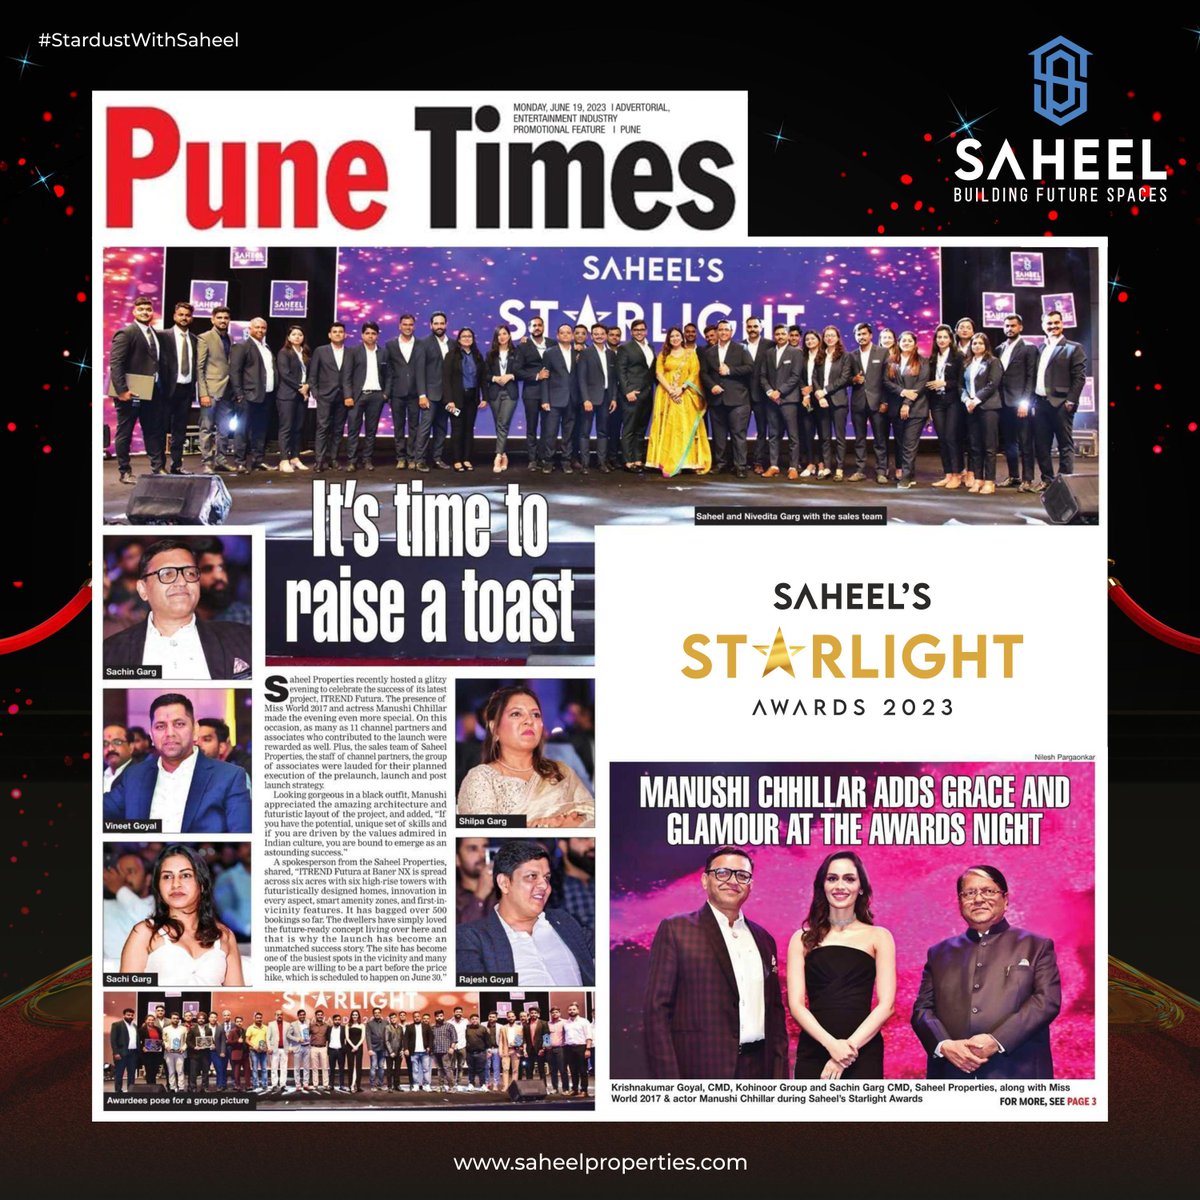 It's time to raise a toast!
Saheel's Starlight Awards 2023 featured in Pune Times today!

#SaheelsStarlightAwards2023 #SaheelProperties #PuneTimes #TimesOfIndia #Pune